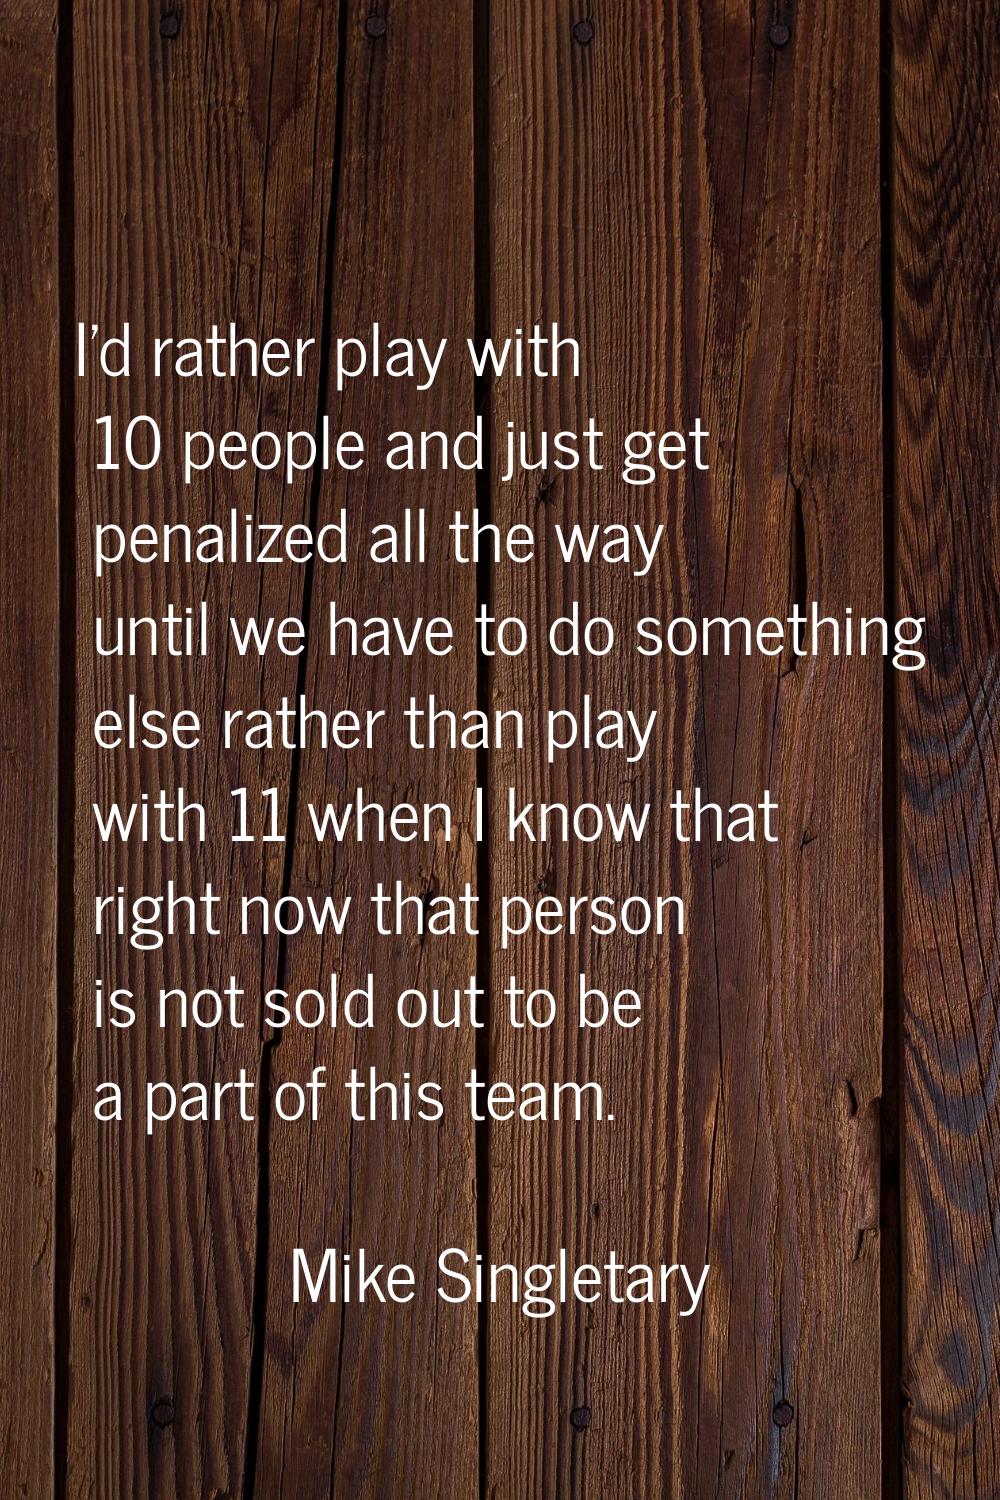 I'd rather play with 10 people and just get penalized all the way until we have to do something els